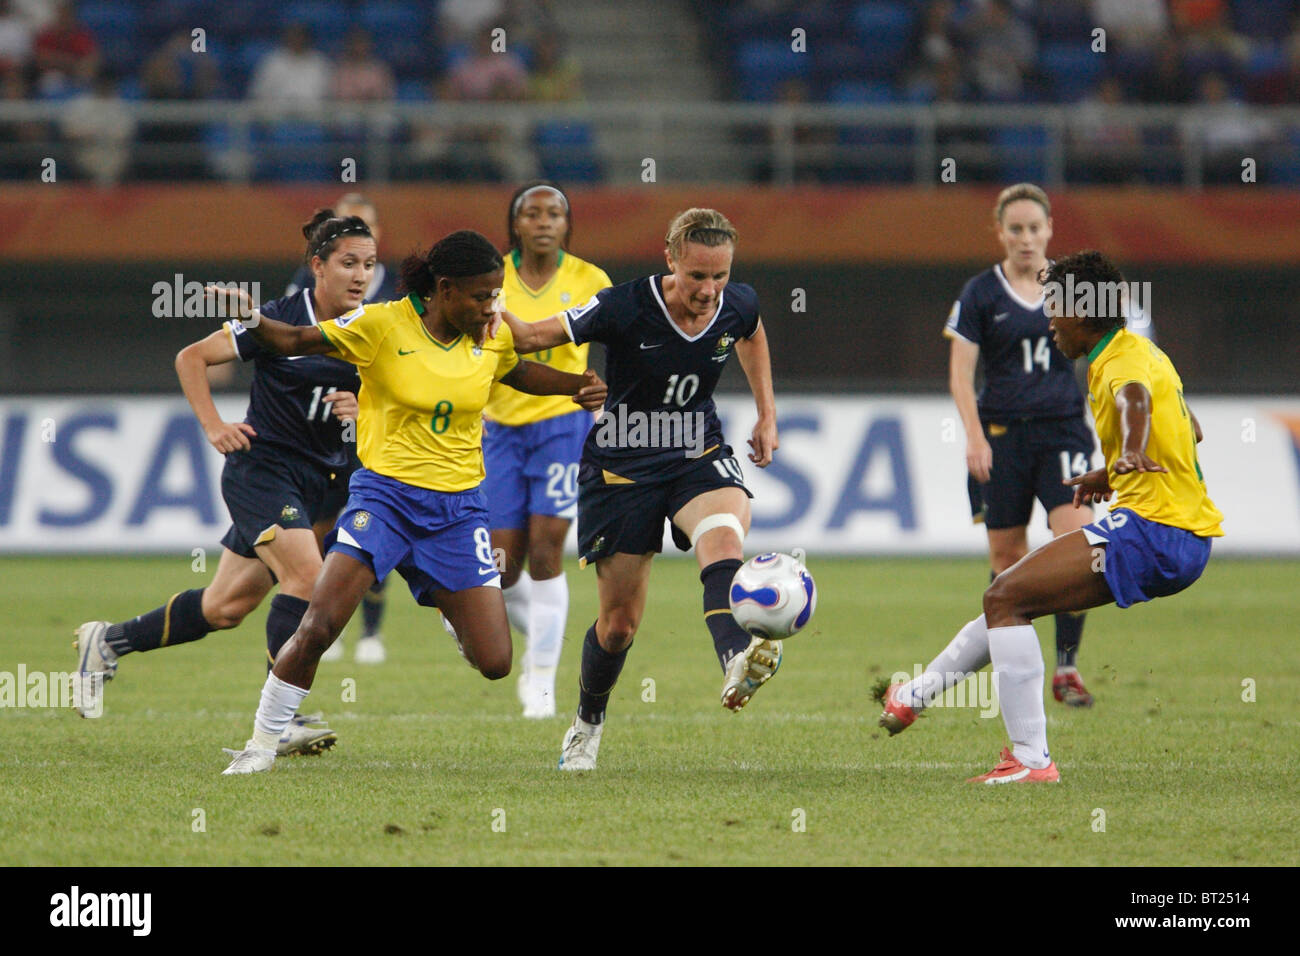 Joanne Peters of Australia (10) kicks the ball as Formiga of Brazil (8) defends during a 2007 Women's World Cup match. Stock Photo